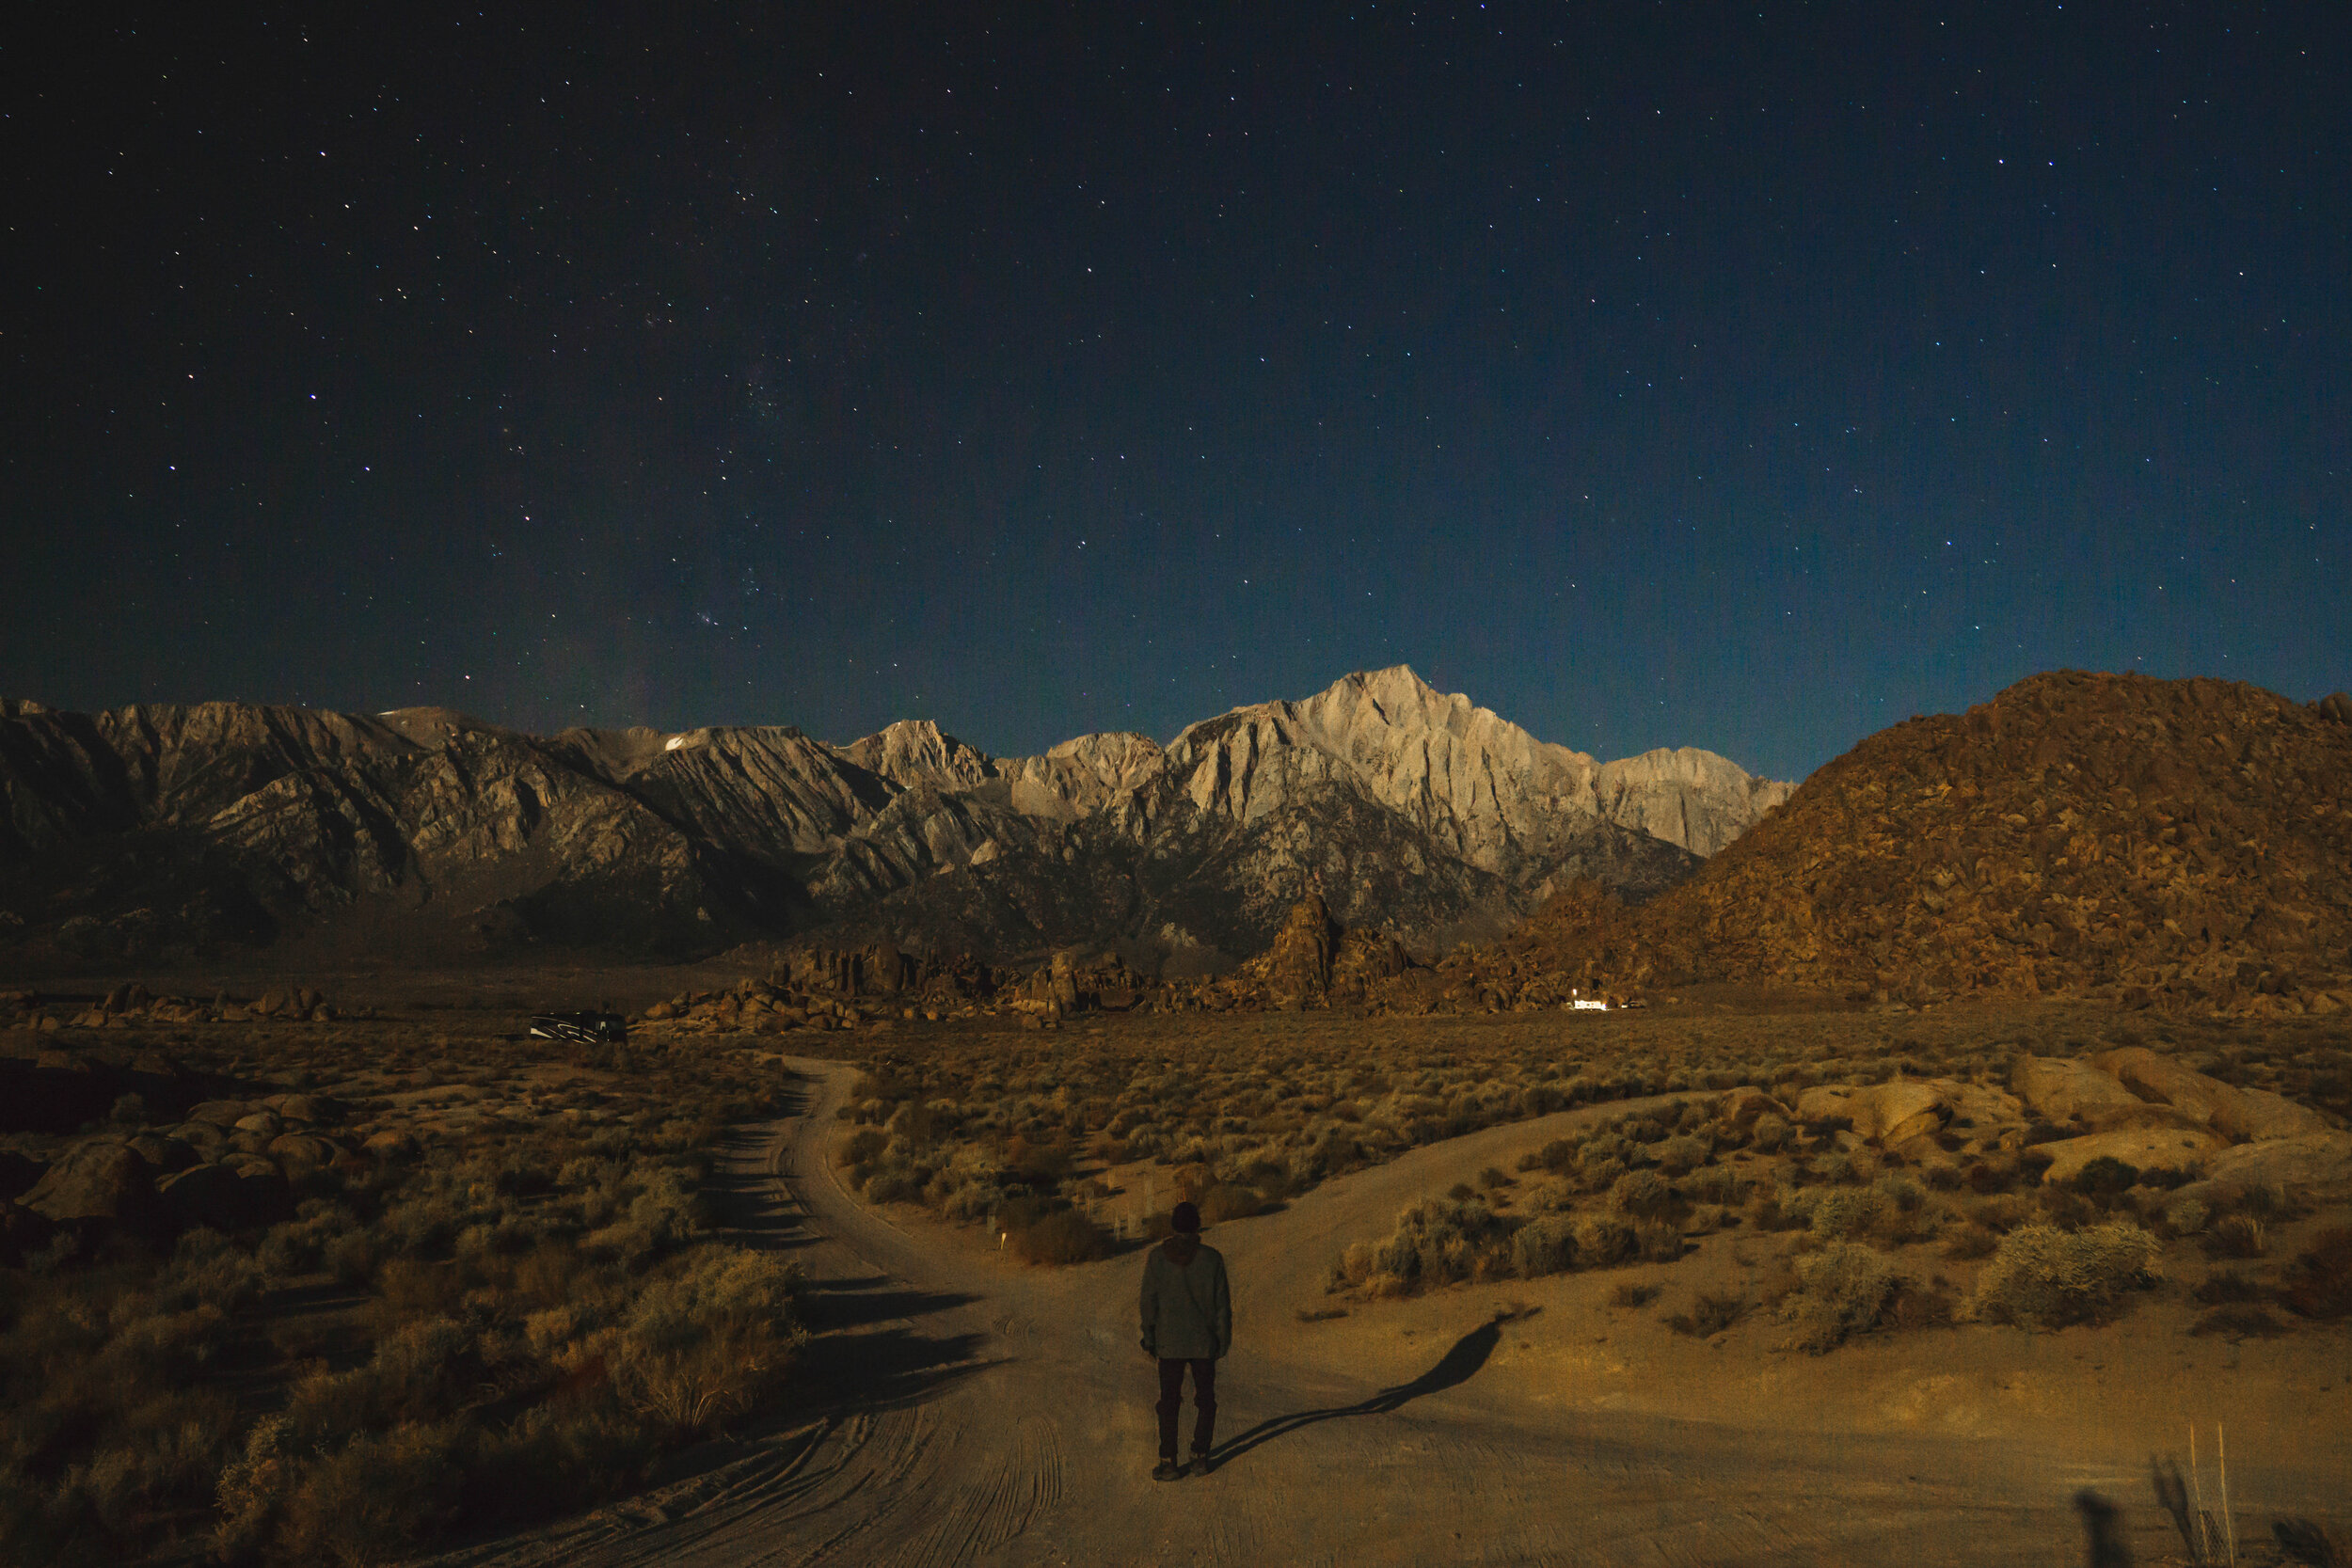 We drove south another hour to camp beneath Mt. Whitney. We were suddenly stuck with a second wind, setting off work a night hike.